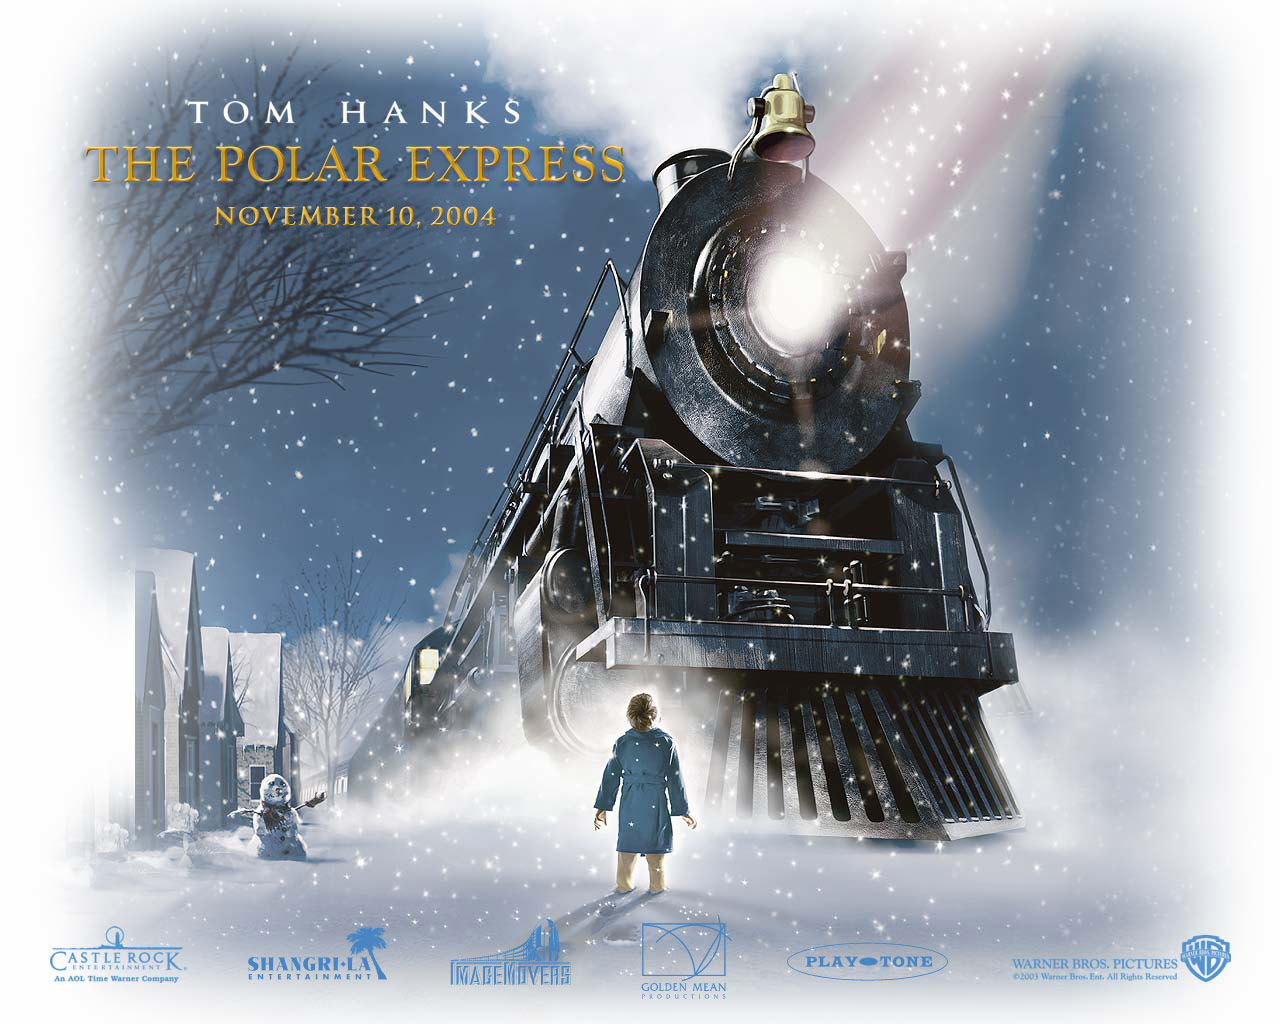 Download full size The Polar Express wallpaper / Movies / 1280x1024